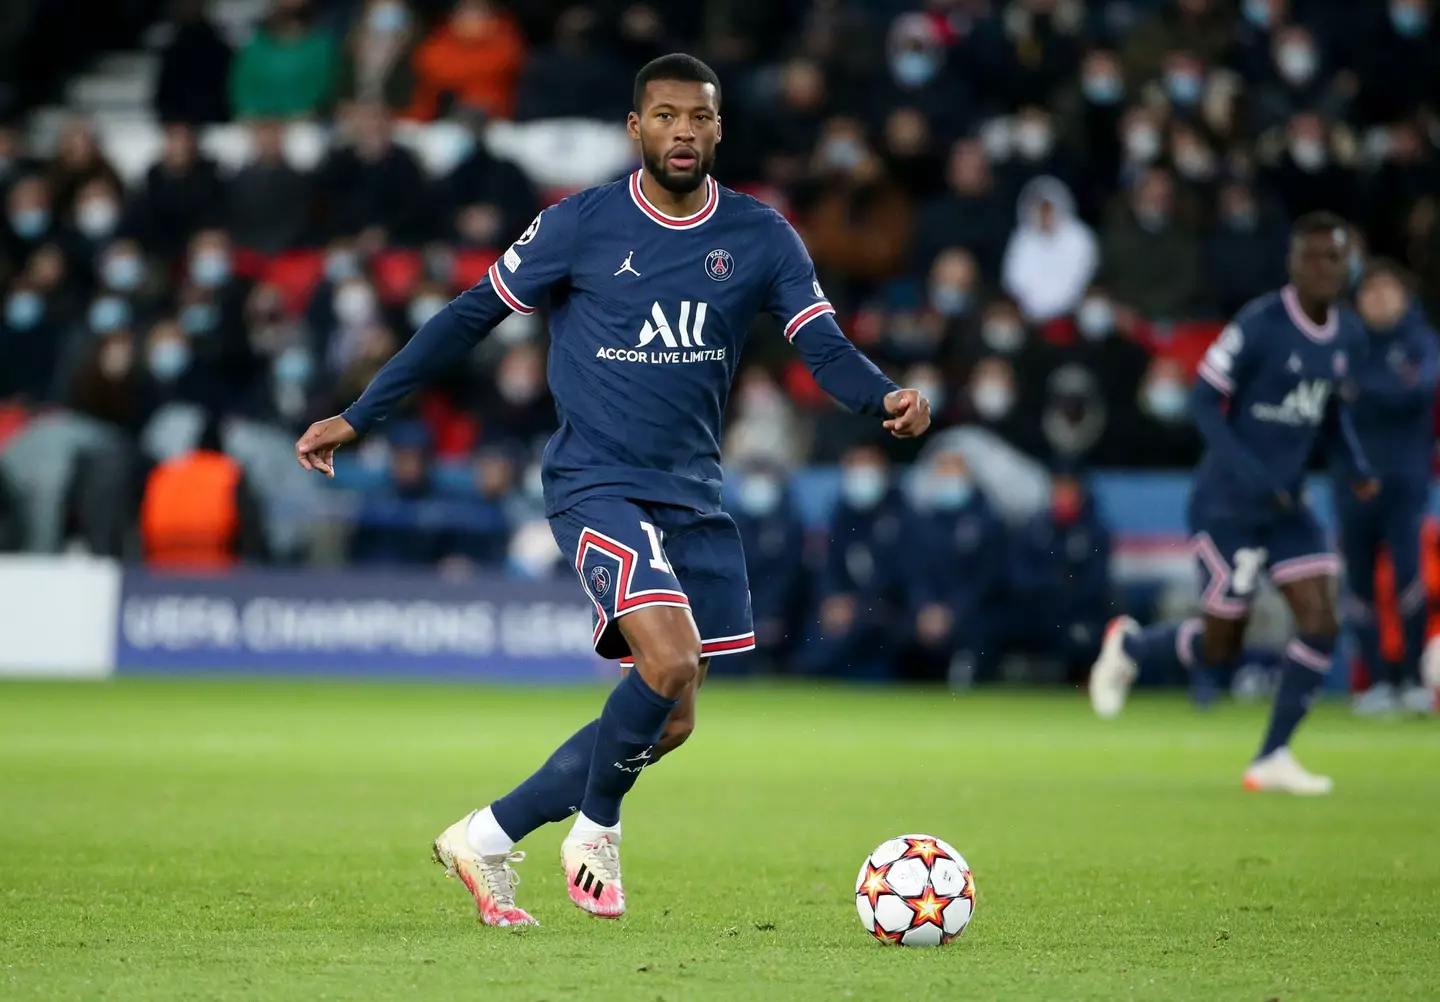 Wijnaldum only joined PSG in the summer. Image: PA Images